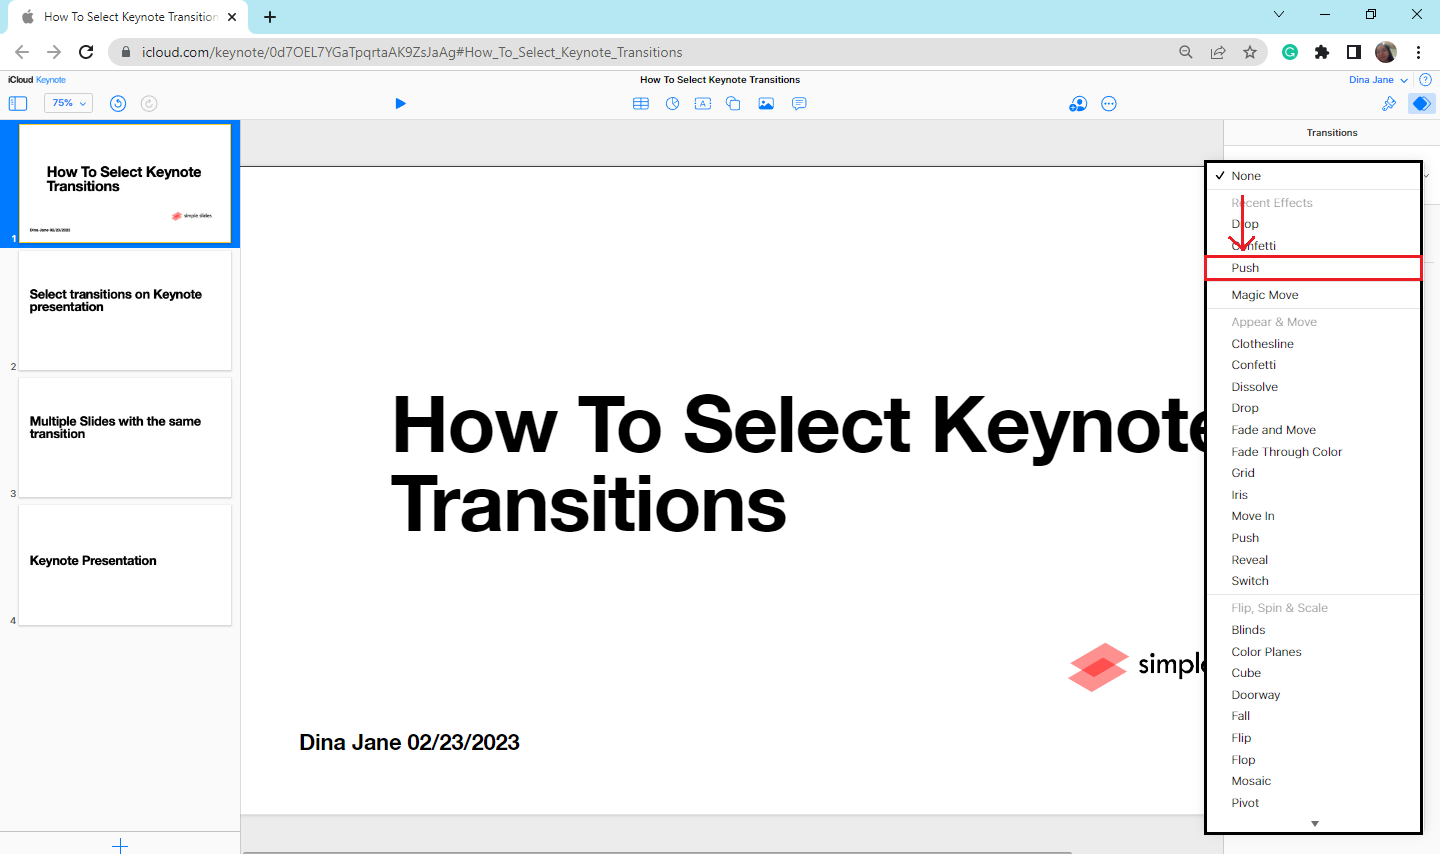 click the "Play" icon, to begins playing immediately after you add a transition to your presentation.